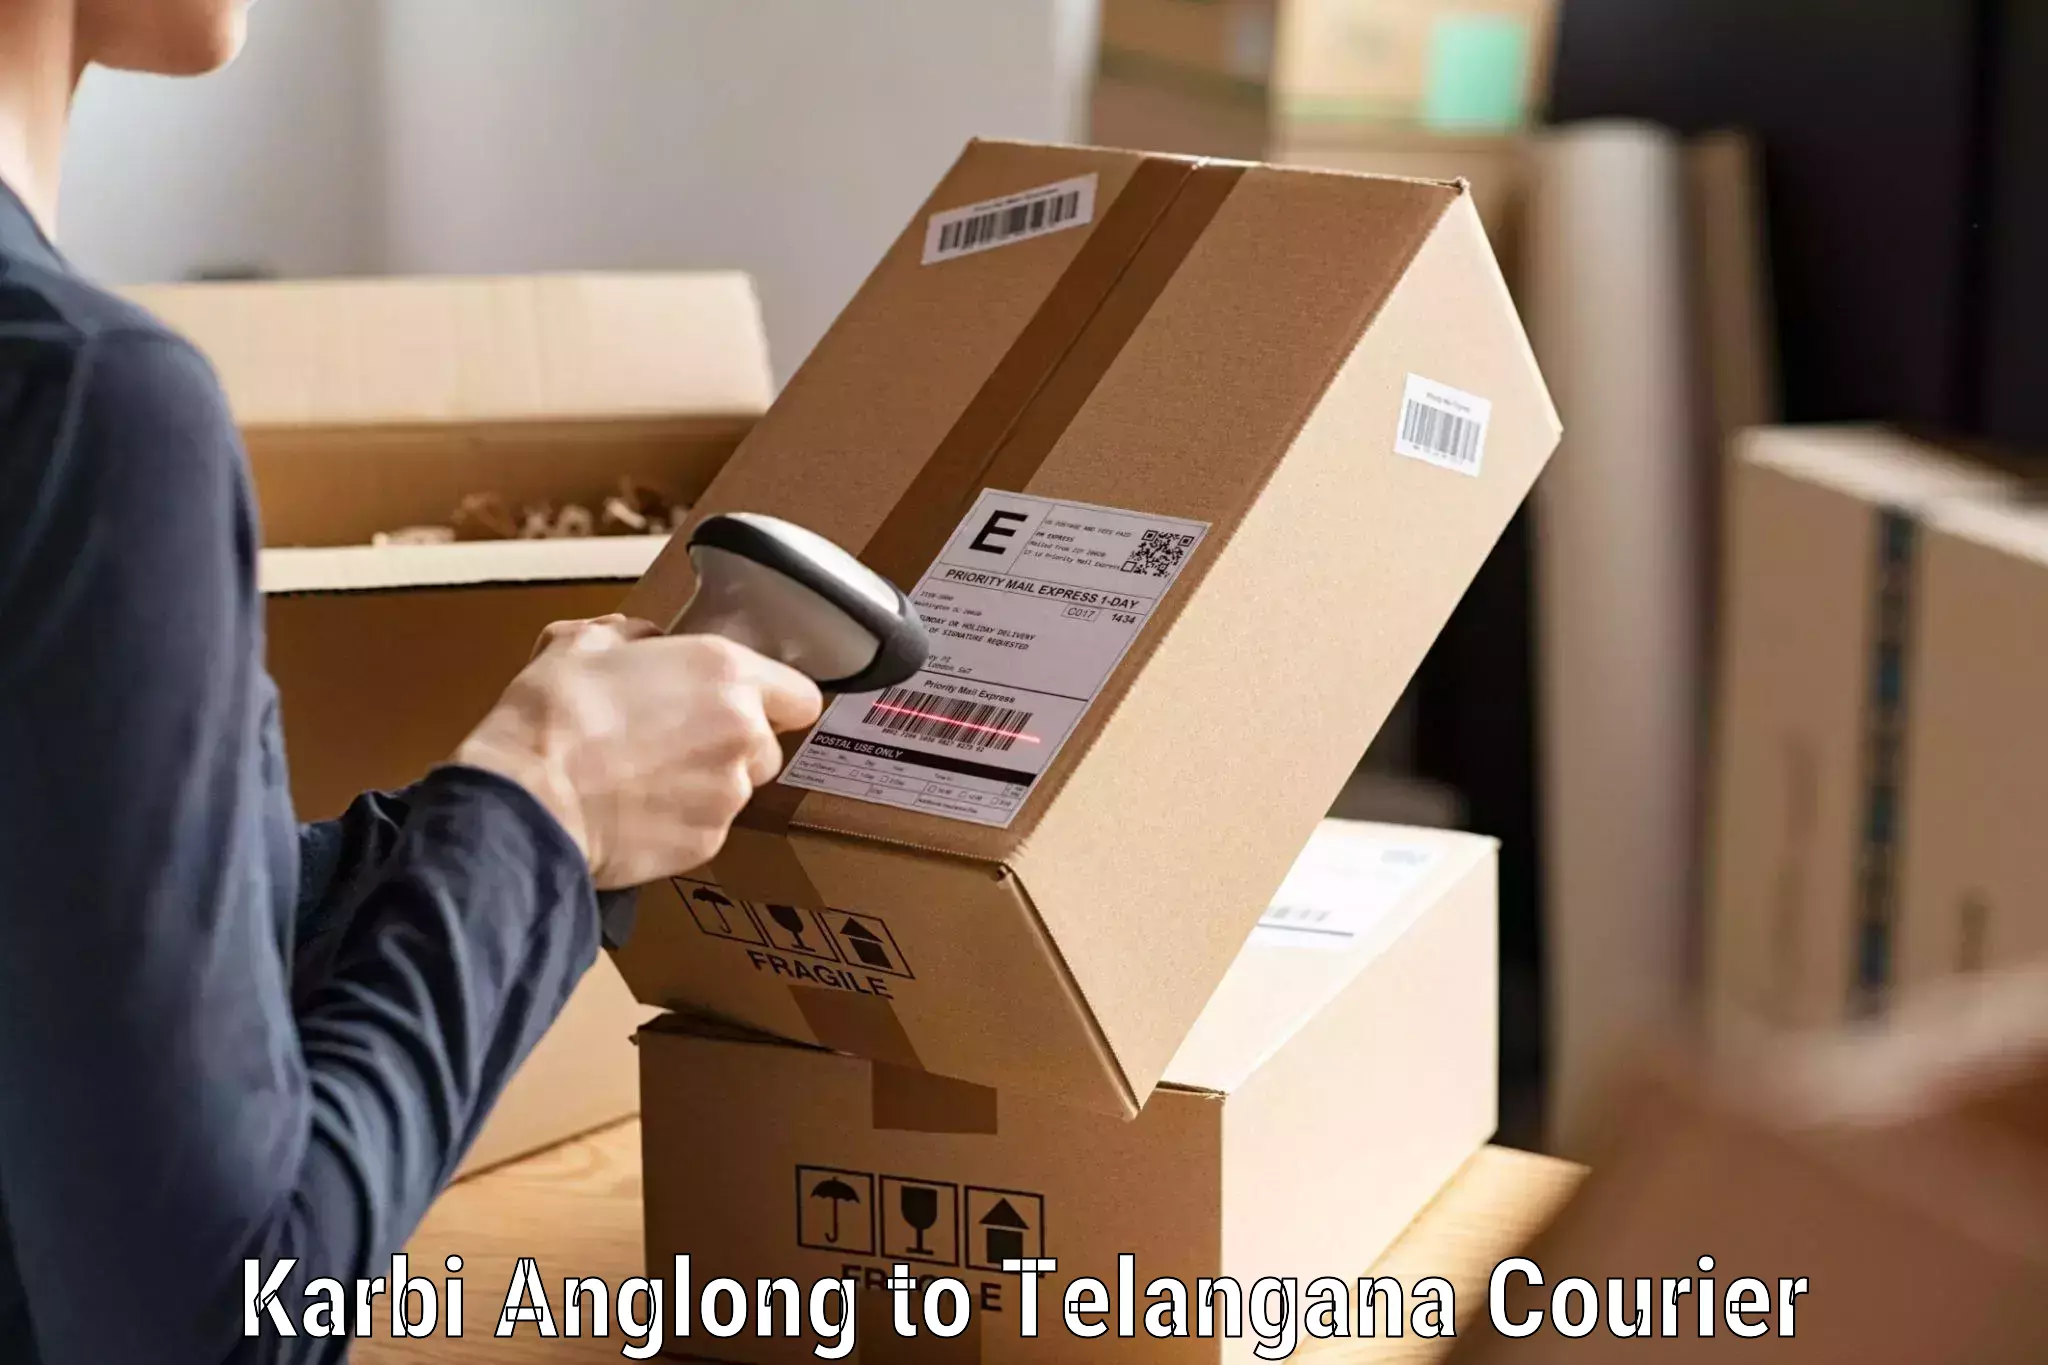 24-hour courier services Karbi Anglong to Telangana